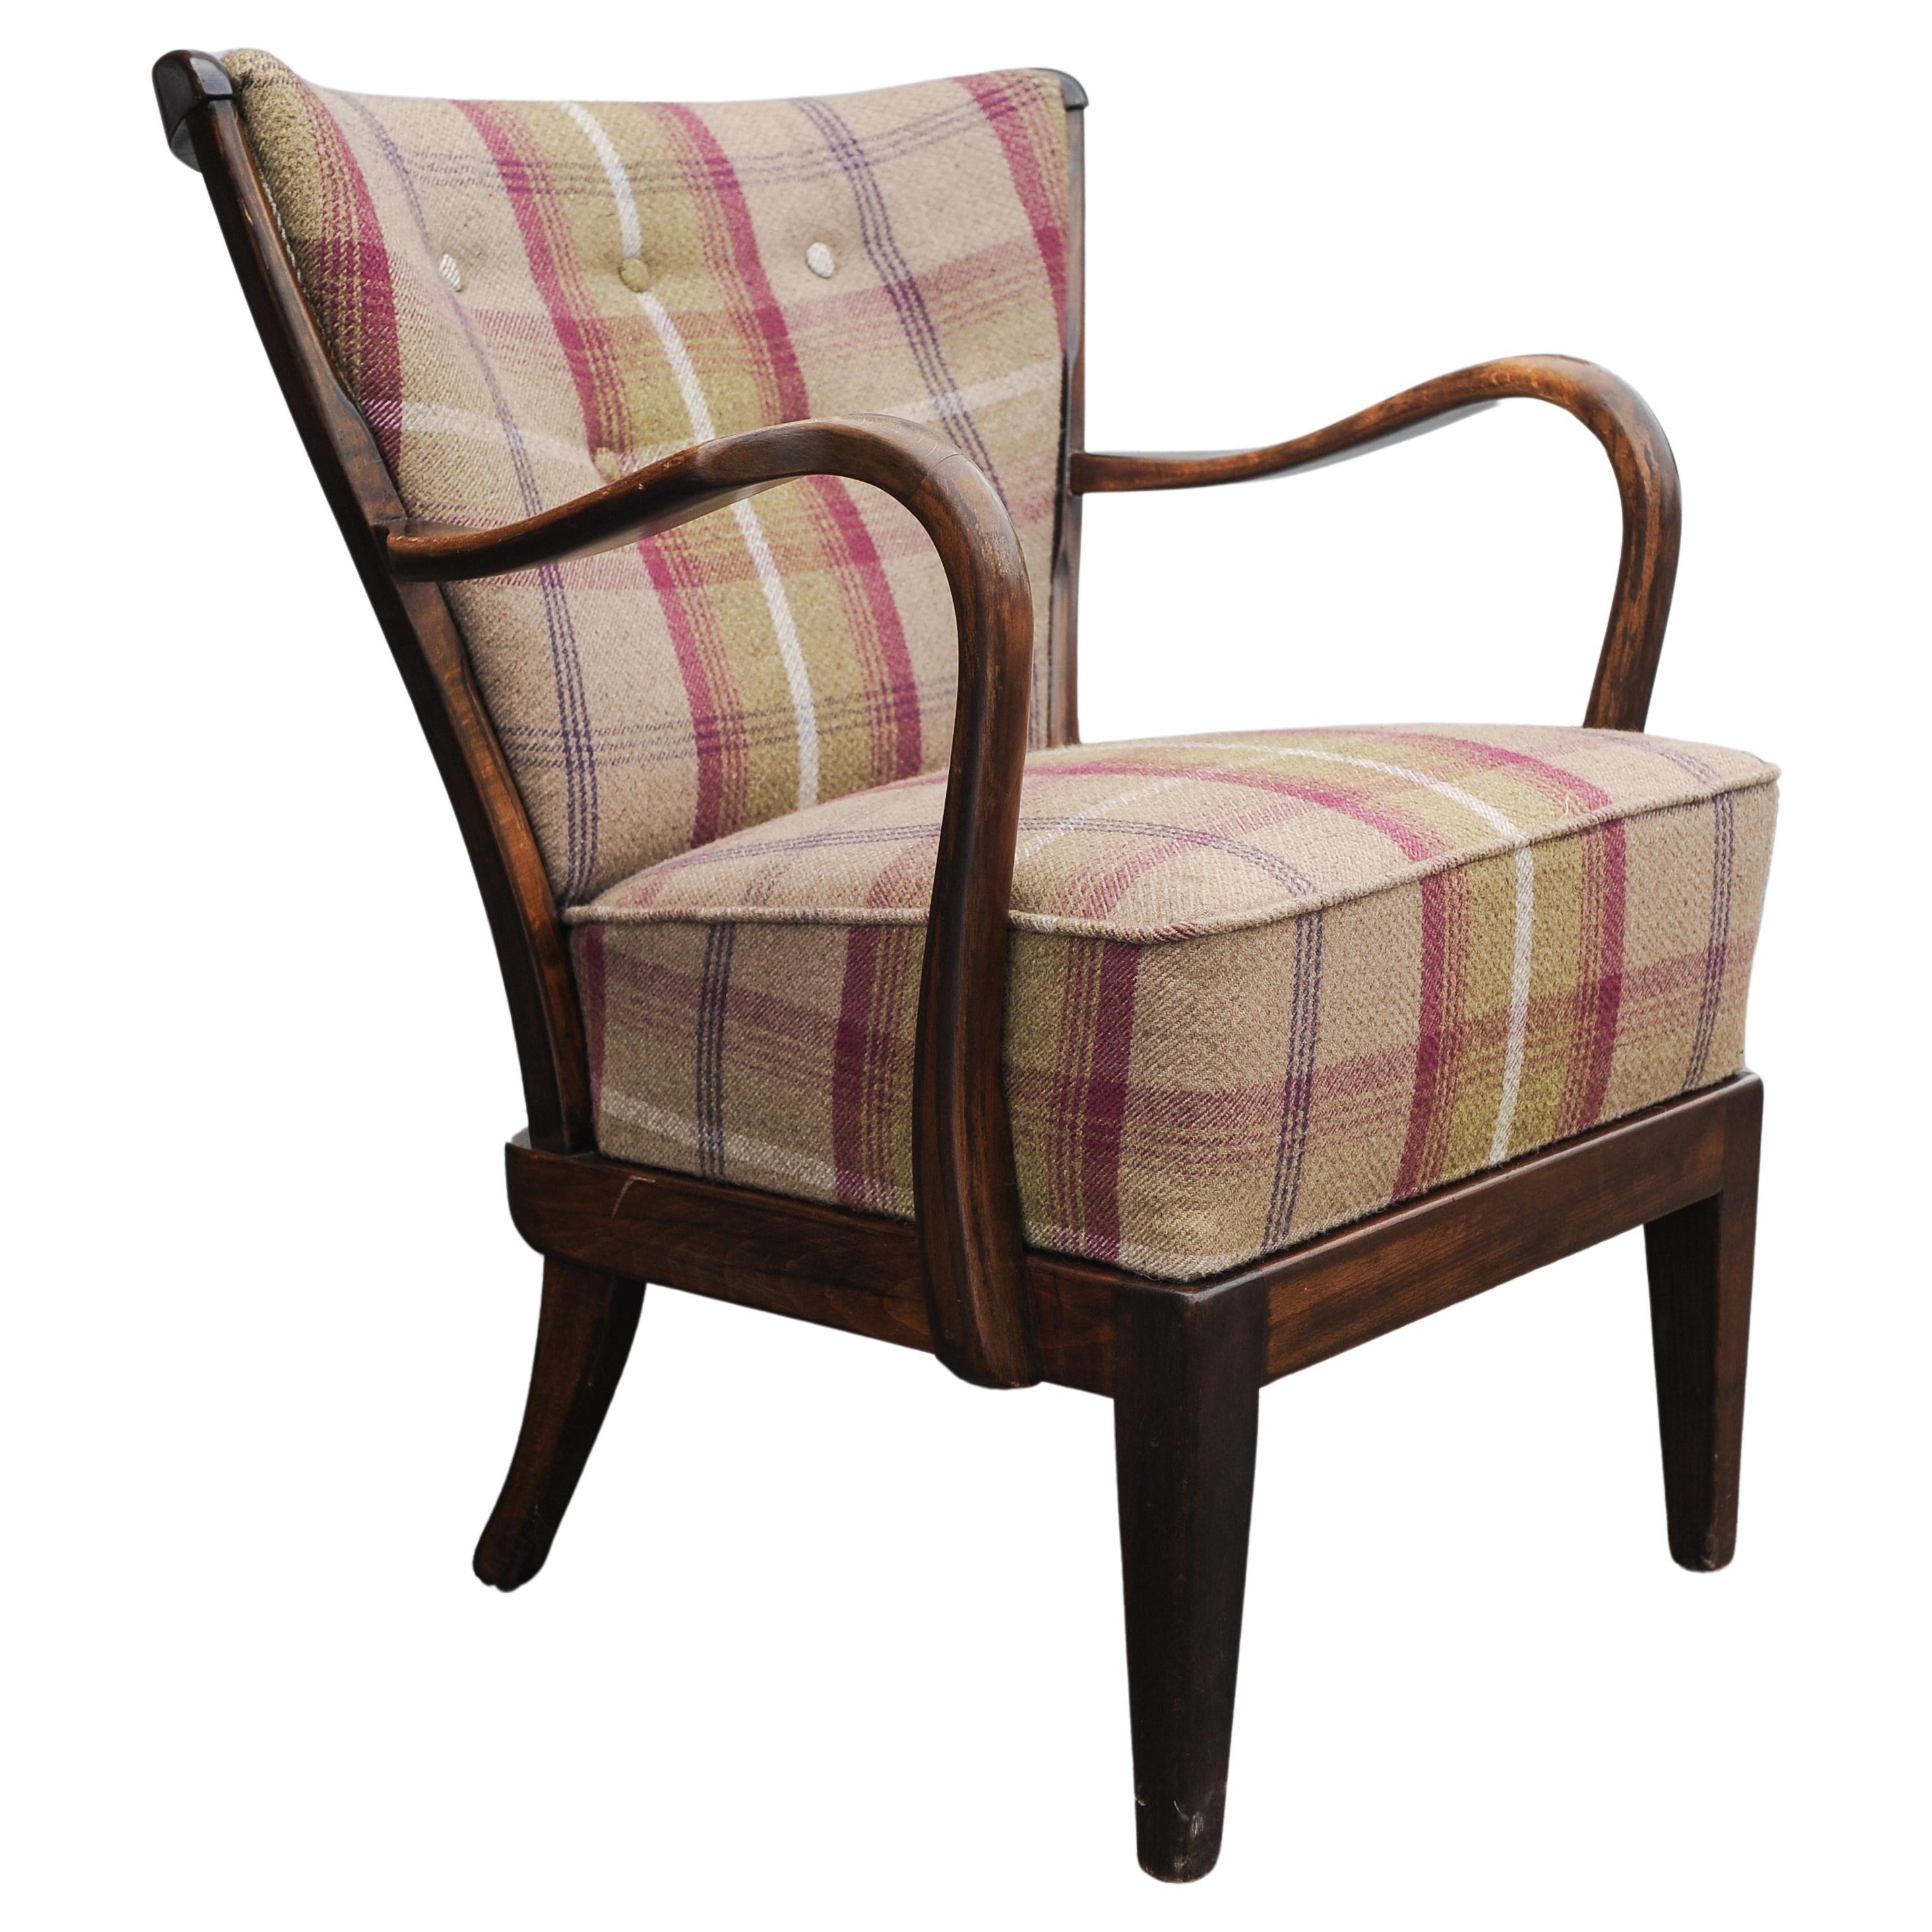 1940's Fritz Hansen Art Deco Oak Bentwood Armchair with Wool Plaid Upholstery 
Made in Denmark, No makers marks

Fritz Hansen, also known as Republic of Fritz Hansen, is a Danish furniture design company. Designers who have worked for Fritz Hansen